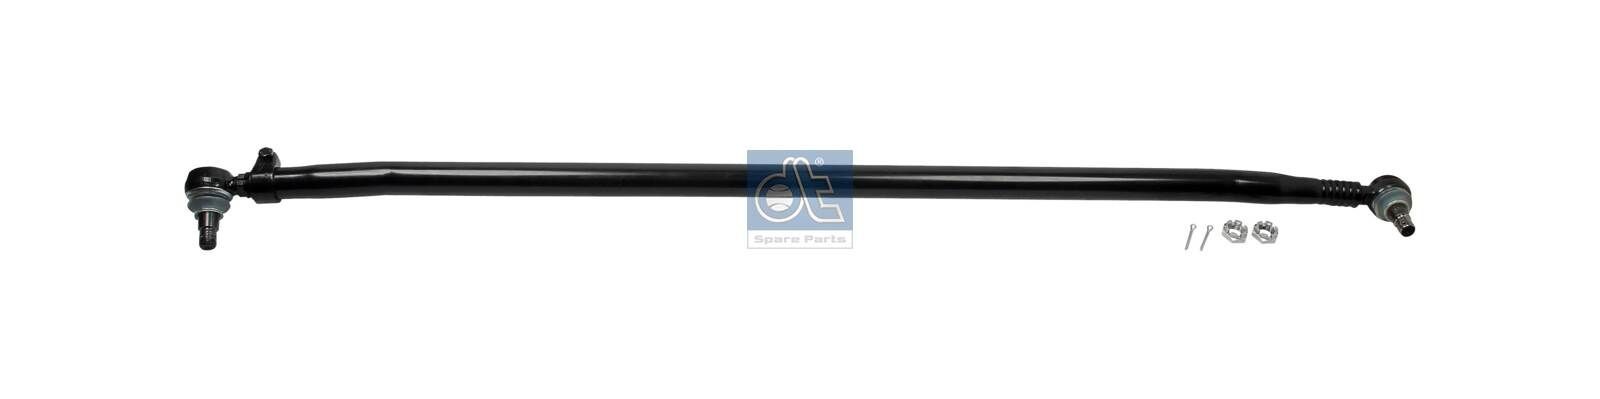 DT Spare Parts 1.19250 Rod Assembly 1409 918